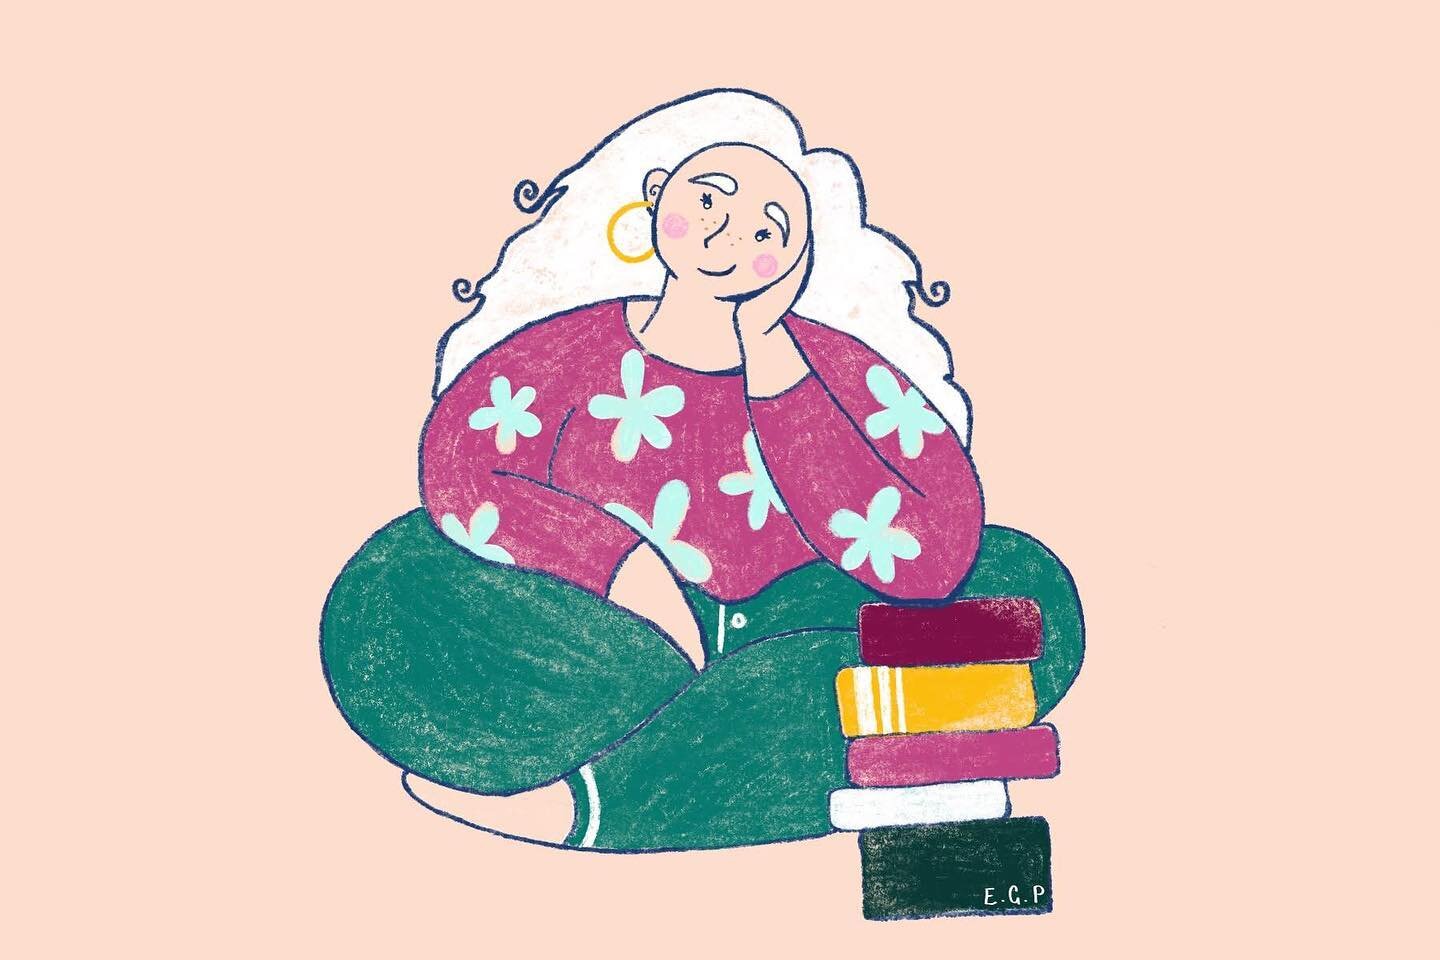 &ldquo;10 Amazing Books You&rsquo;ve Never Read&rdquo; by @lizboo113 and this fabulous digital illustration by Ellie Gomez Price @elliepricey are up in the featured section for Issue #3 ! Link in bio 🎉